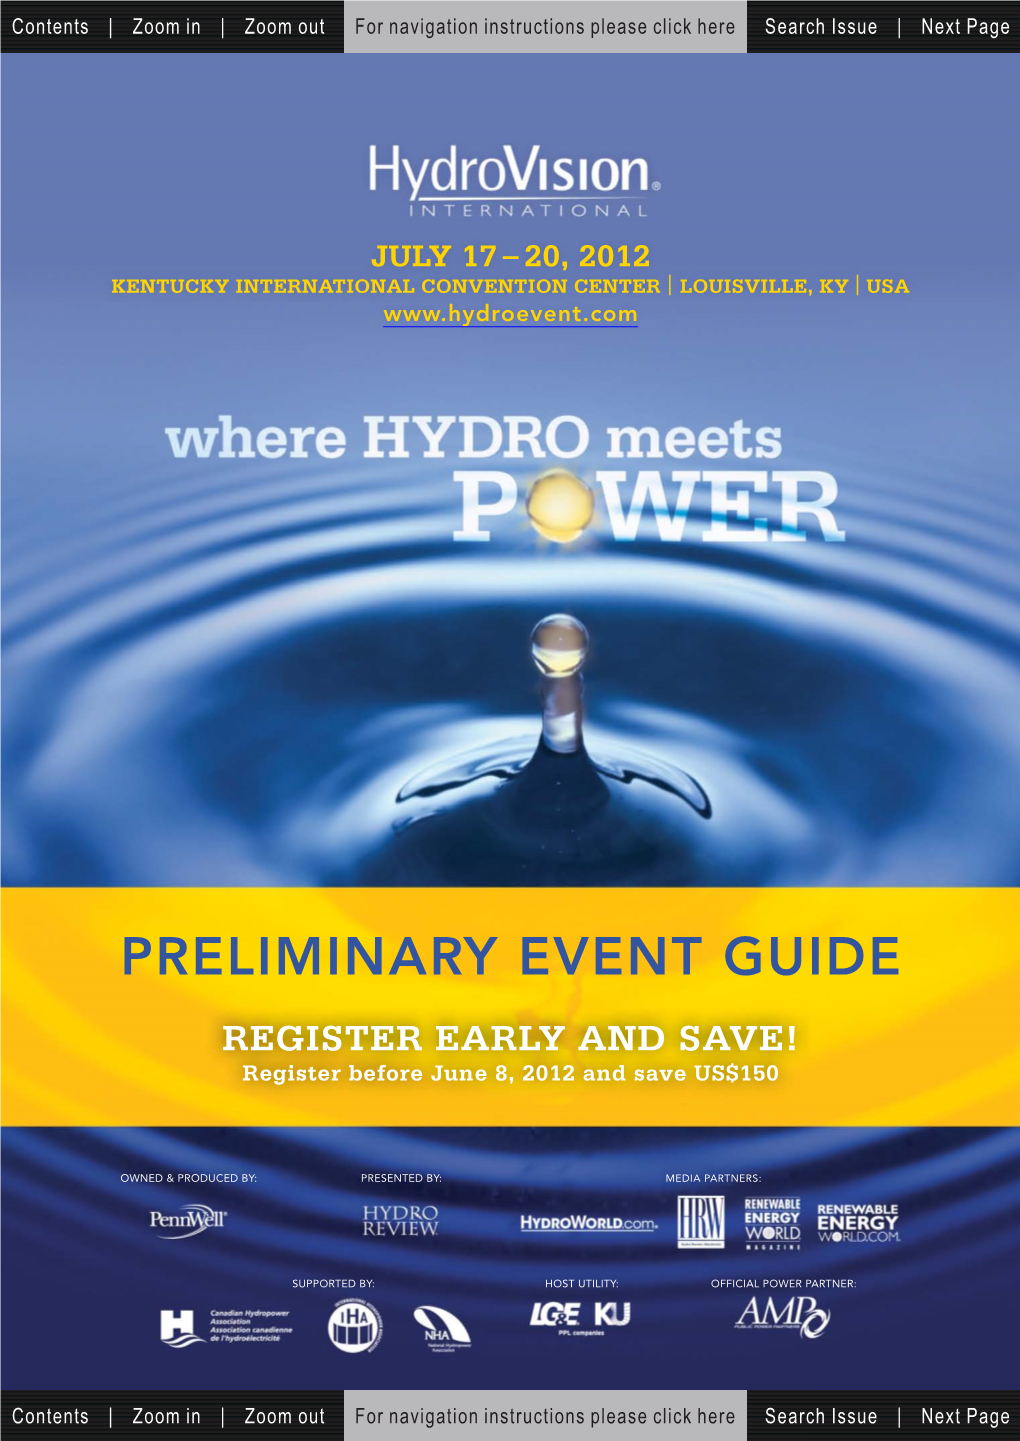 PRELIMINARY EVENT GUIDE REGISTER EARLY and SAVE! Register Before June 8, 2012 and Save US$150